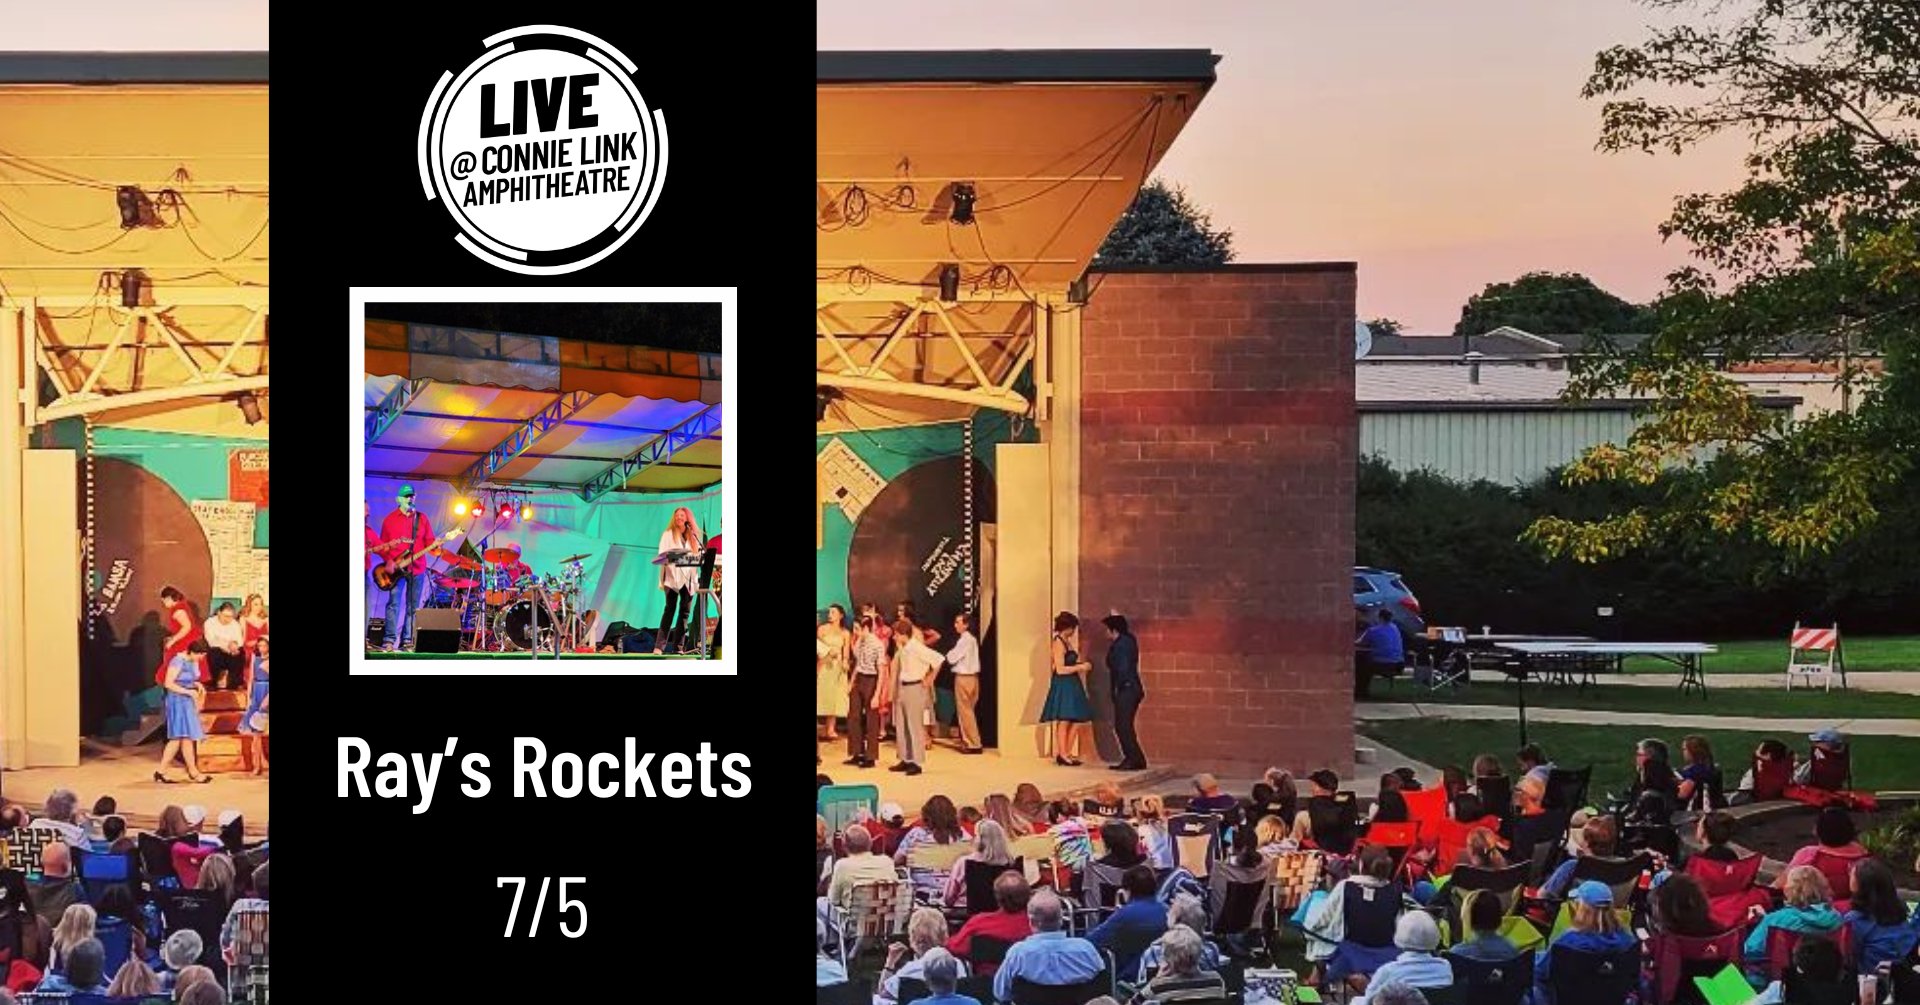 Normal LIVE presents Ray's Rockets @ Connie Link Amphitheatre